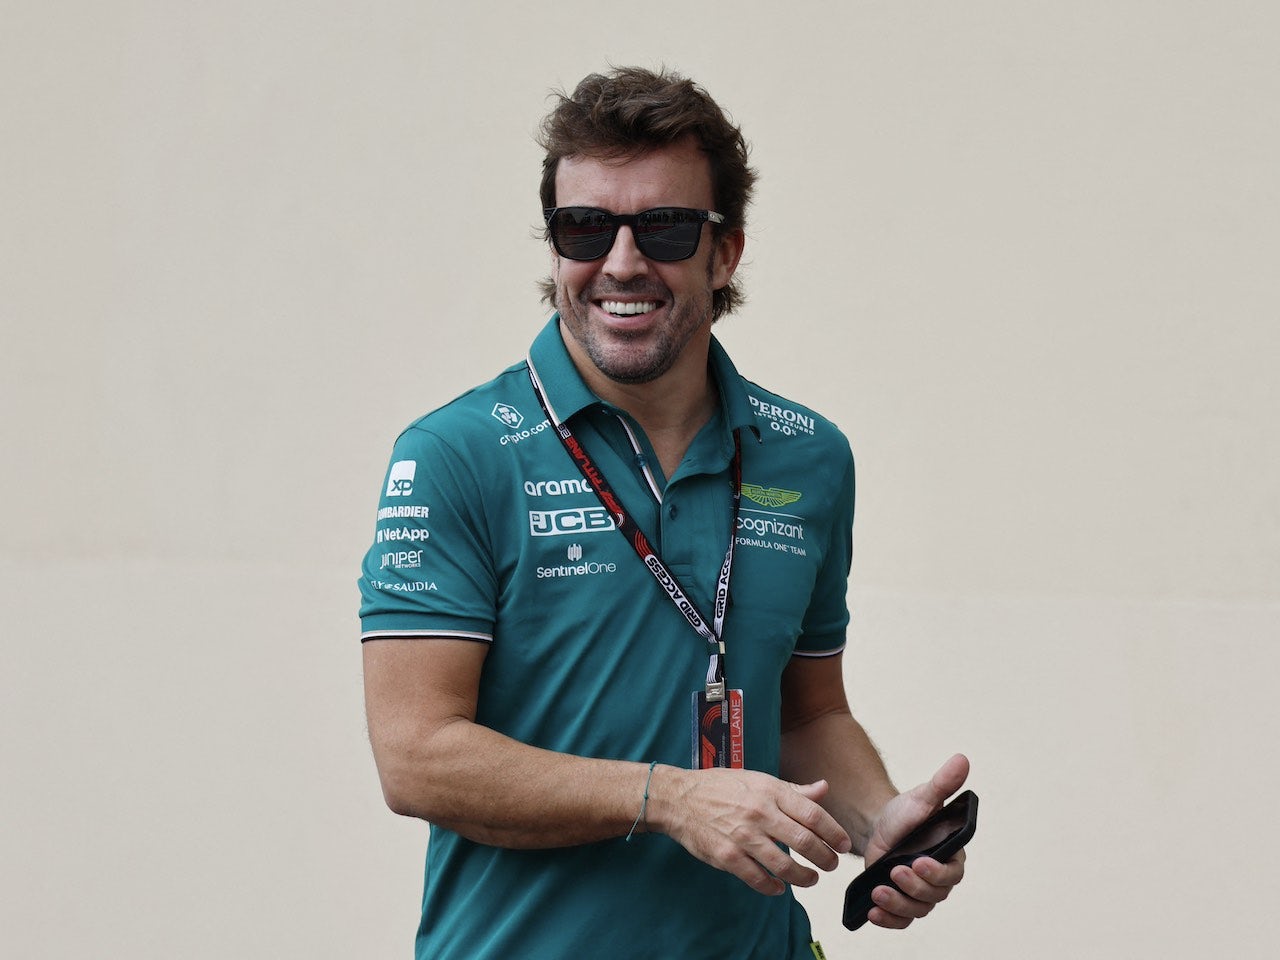 Alonso's new F1 contract receives mixed feedback from Leclerc